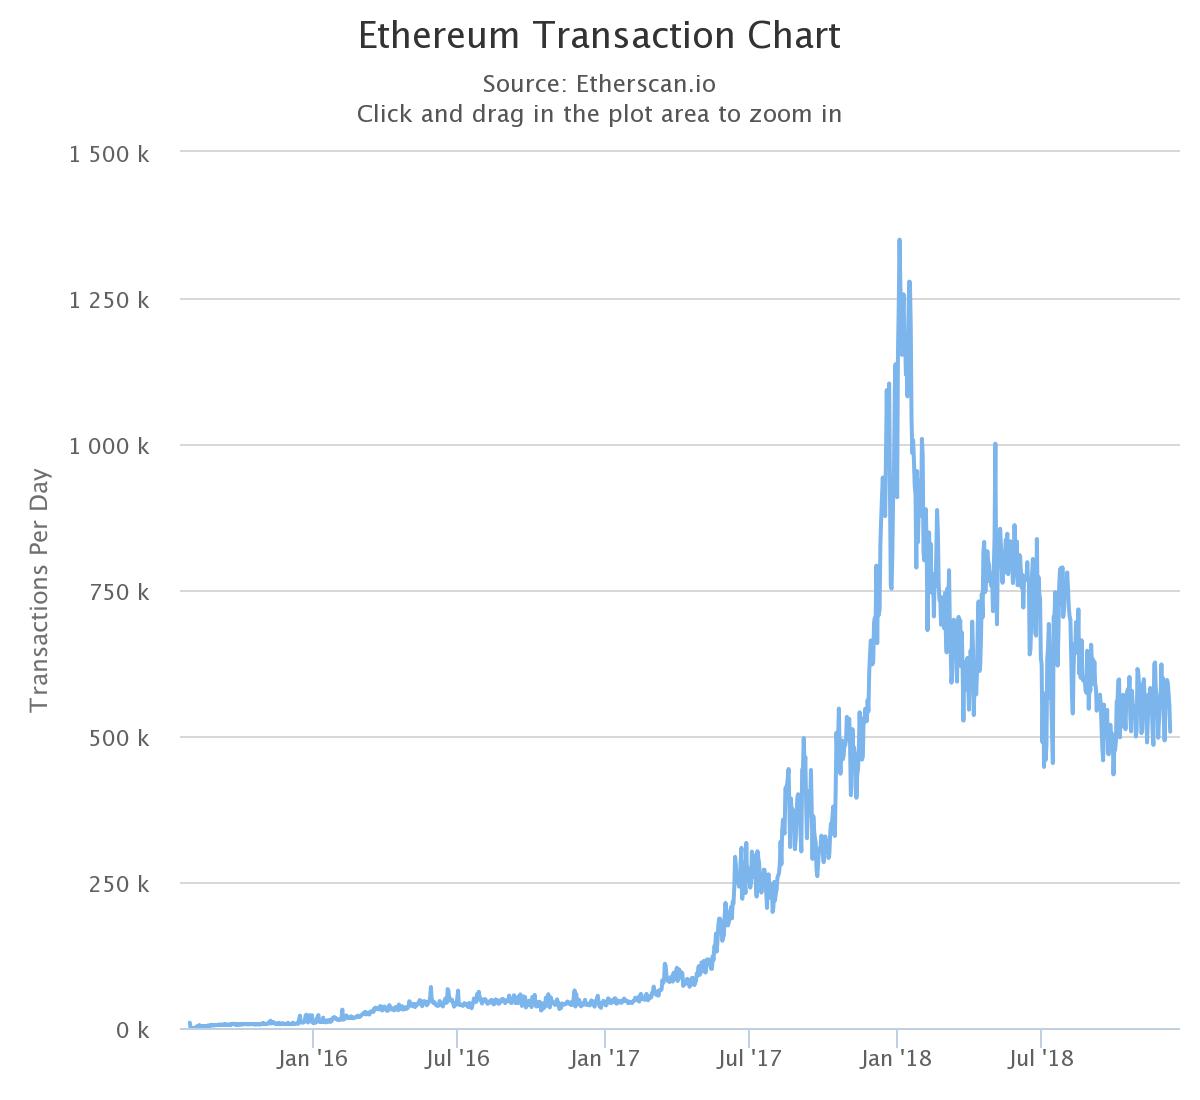 Activity on Ethereum has been largely unaffected by the recent price slide.